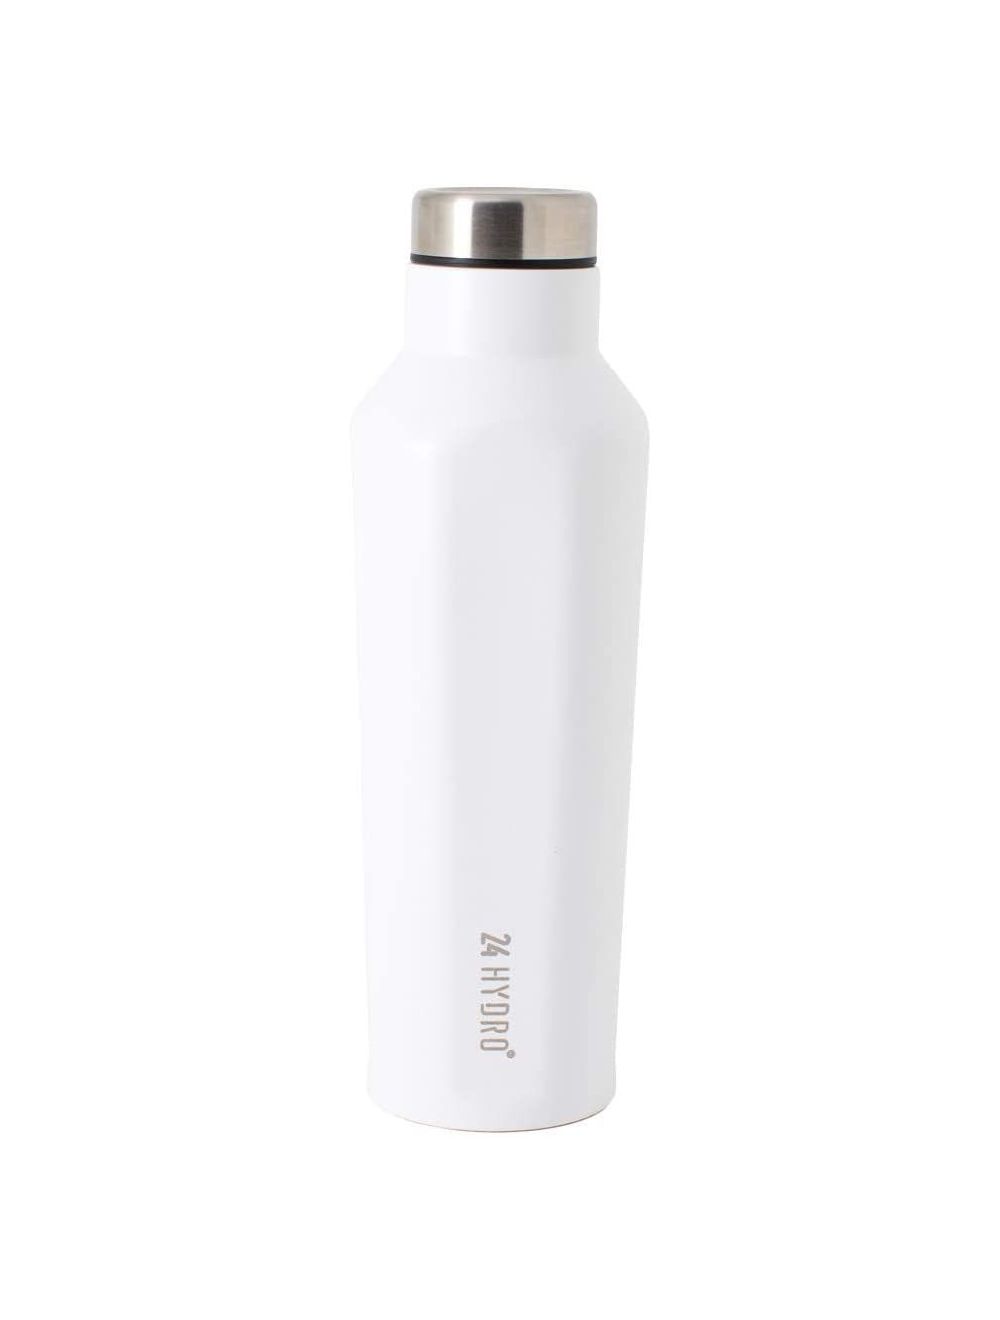 Neoflam Hydro Tumbler, Water, Hydration Bottle, 500 ml, Marble White